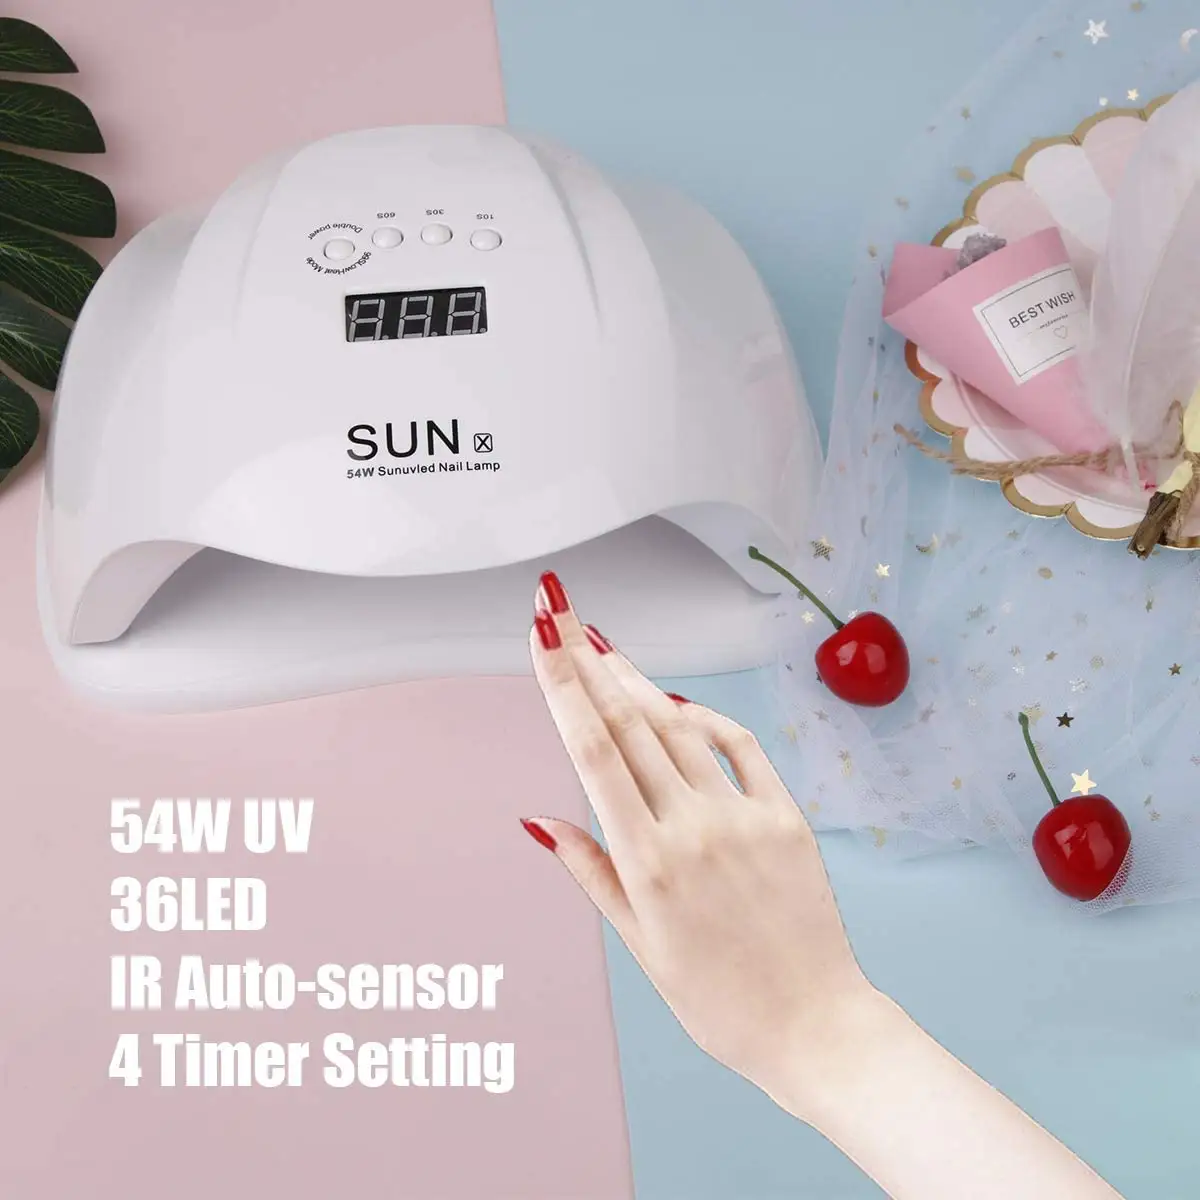 Hot Sale Uv Led Nail Lamp 54w Nail Dryer For Curing All Types Gel Nail Art Machine